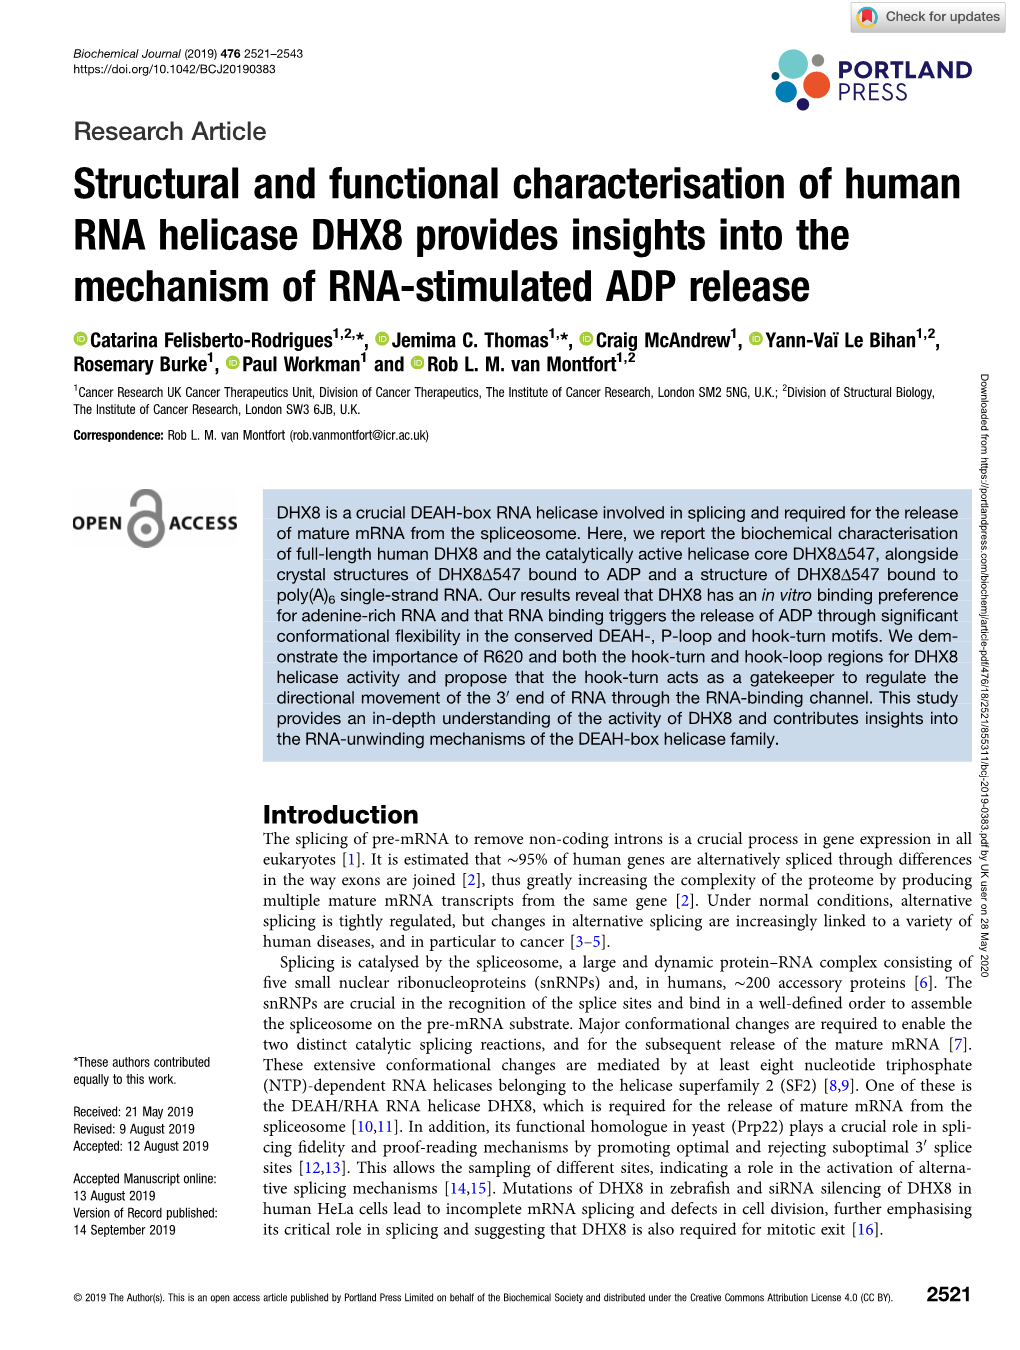 Structural and Functional Characterisation of Human RNA Helicase DHX8 Provides Insights Into the Mechanism of RNA-Stimulated ADP Release